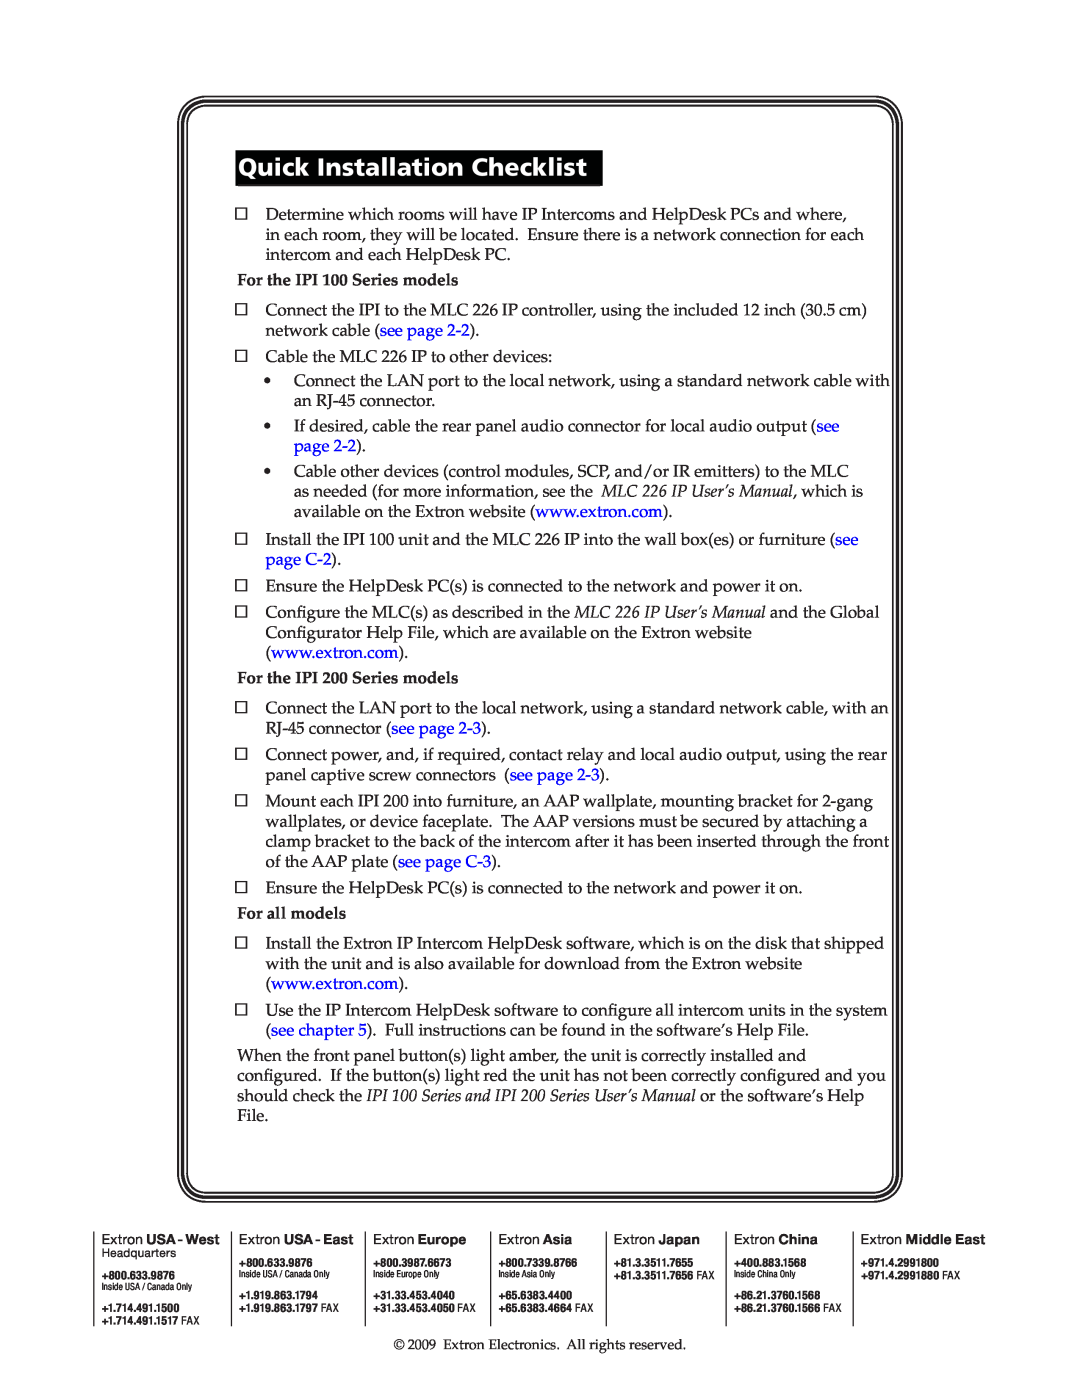 Extron electronic manual Quick Installation Checklist, For the IPI 100 Series models, For the IPI 200 Series models 